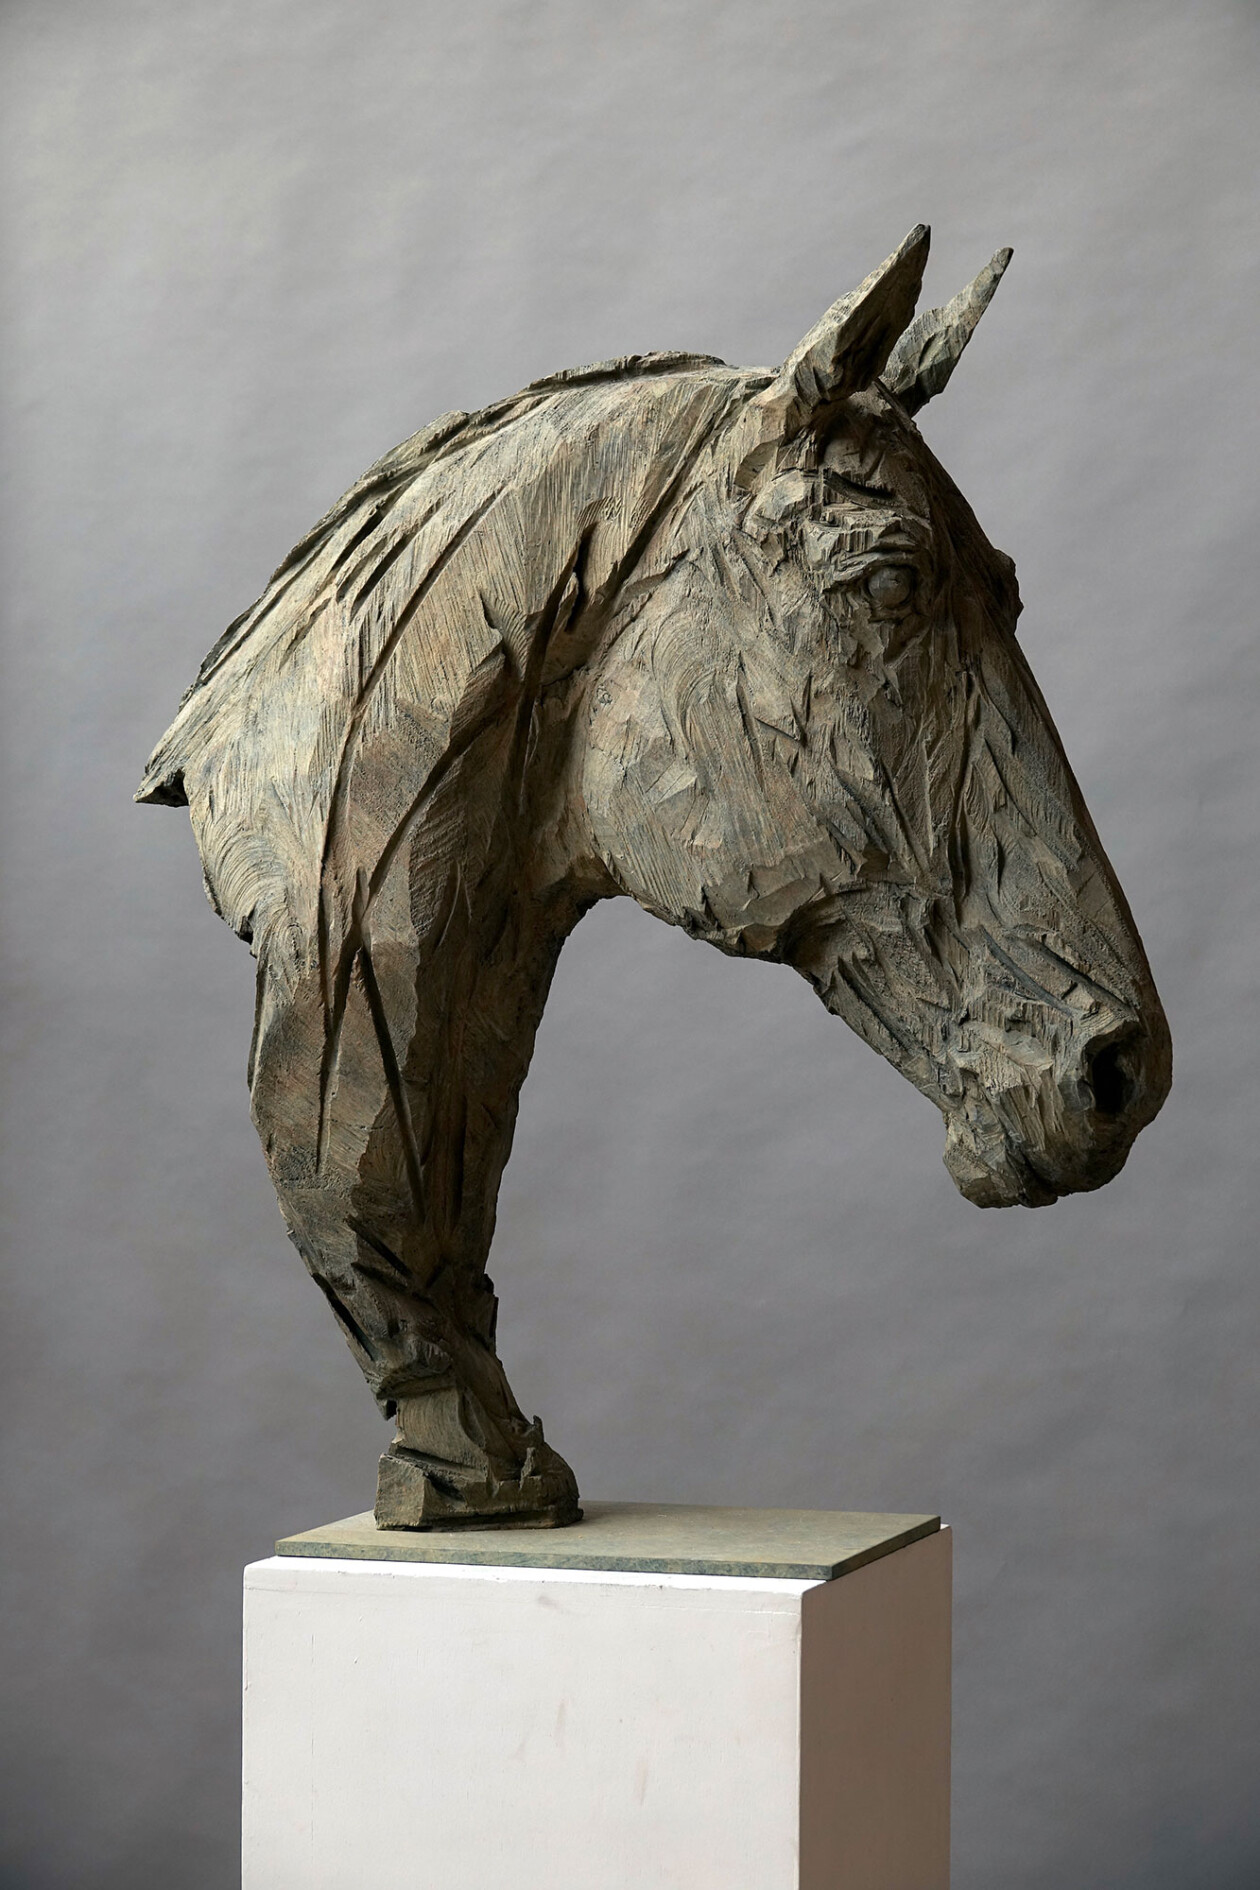 Jürgen Lingl Hand Carves Precise And Textured Figurative Sculptures From Wood (10)